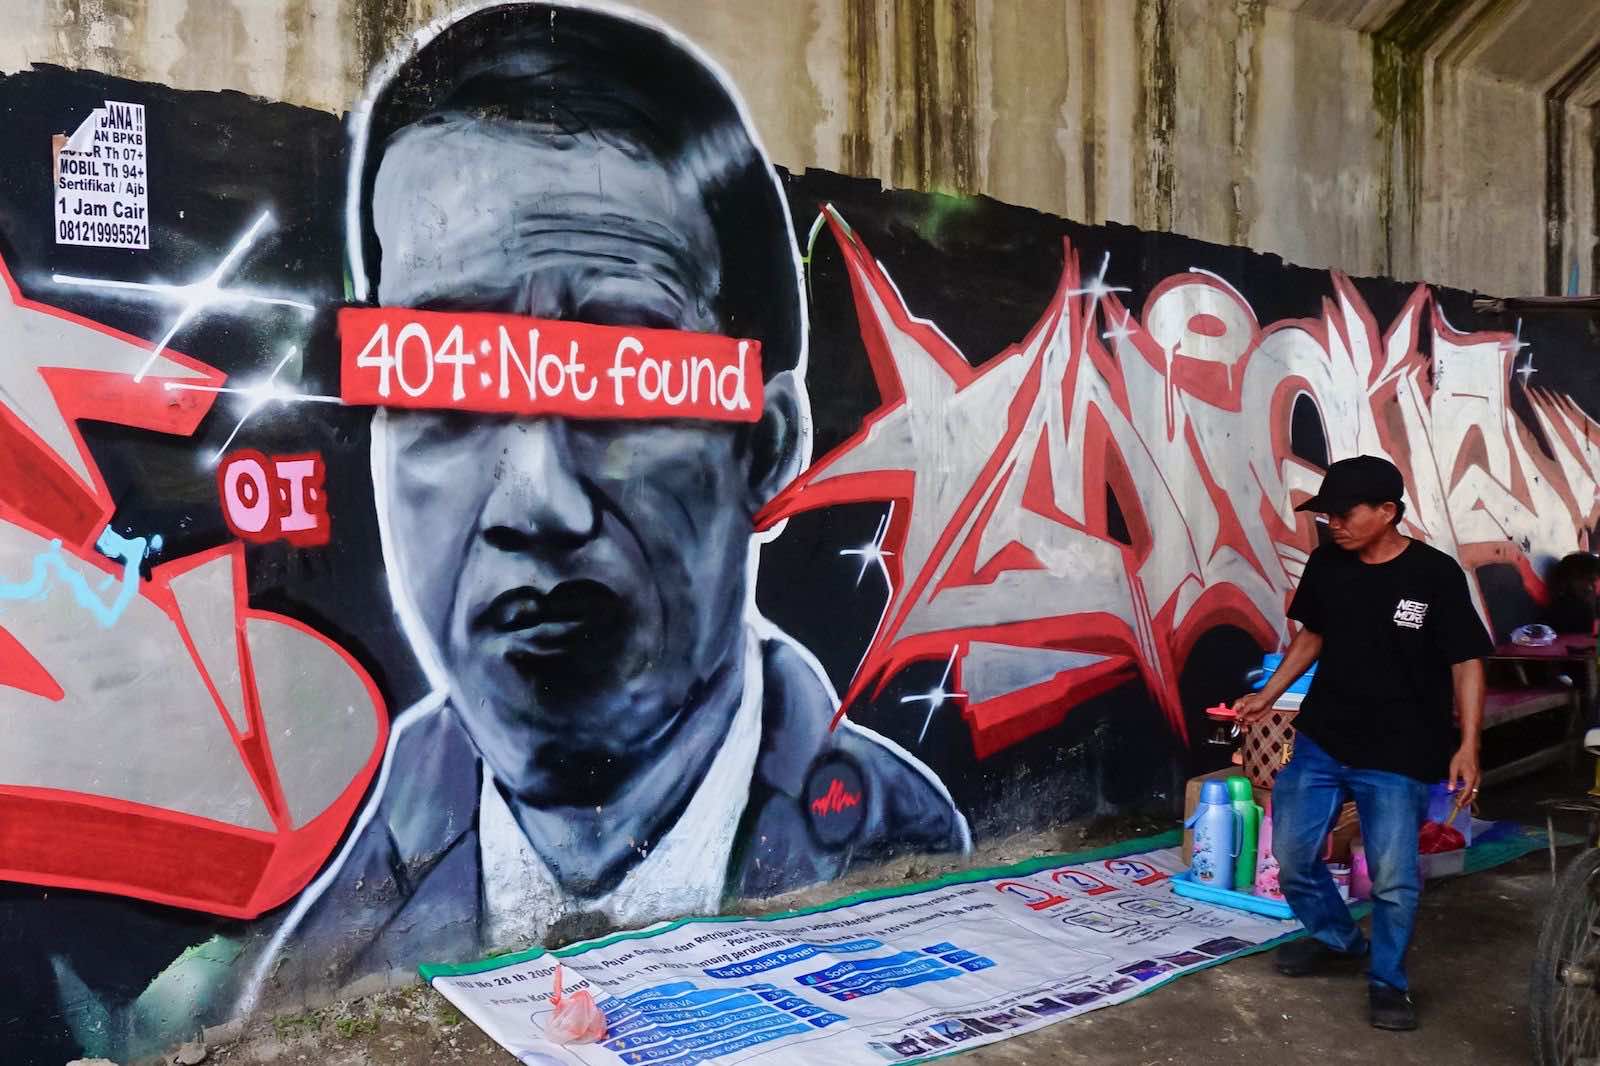 A mural depicting Indonesian President Joko Widodo with a “404: not found” network error message covering his eyes in Tangerang, Jakarta, before being painted over (Fajrin Raharjo/AFP via Getty Images)